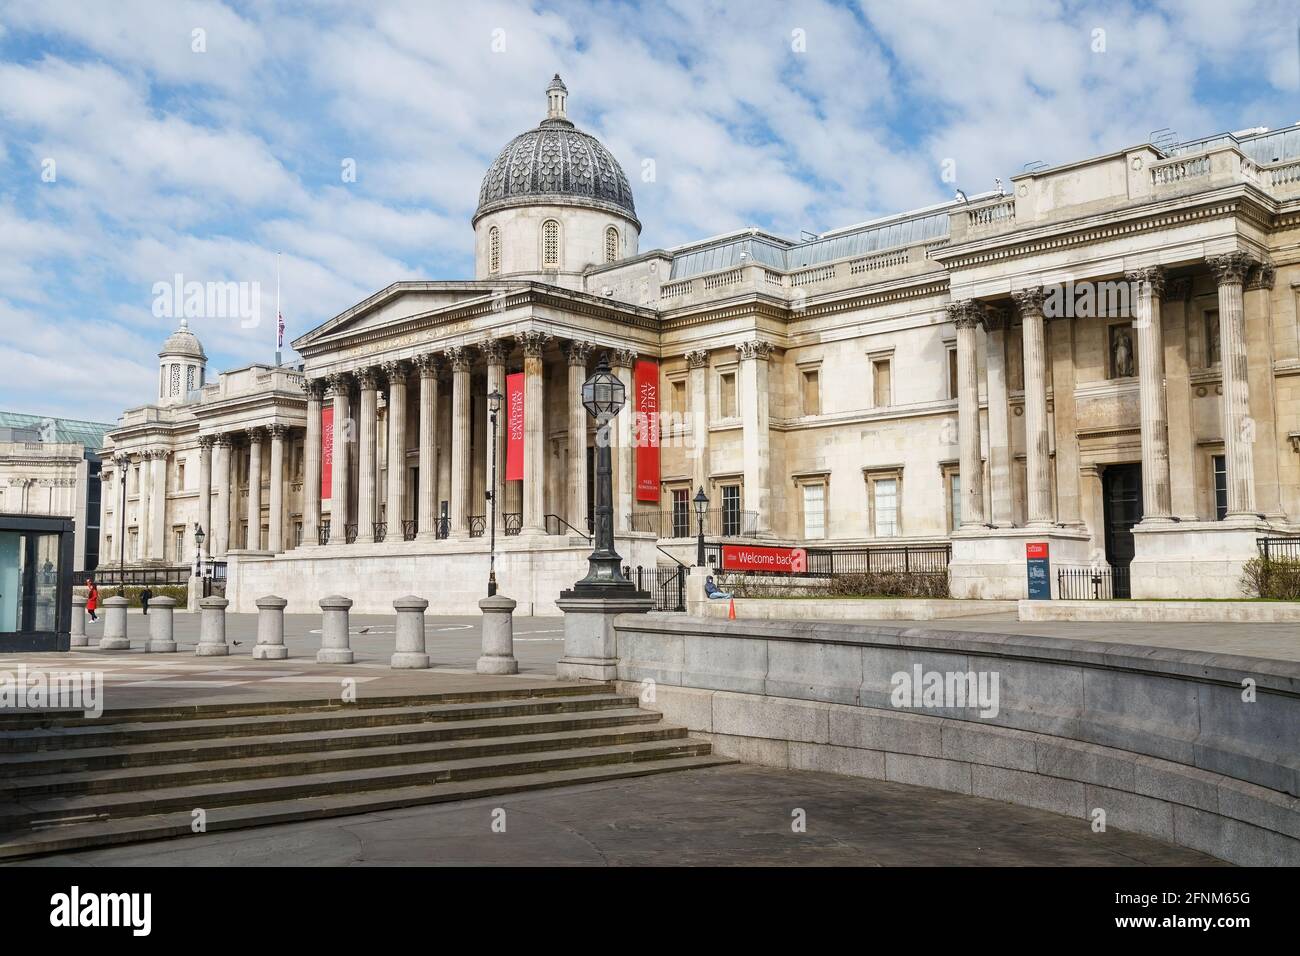 Two people outside the National Gallery taken from Trafalgar Square. One person sitting on a wall wearing a face mask, the other walking away. Stock Photo